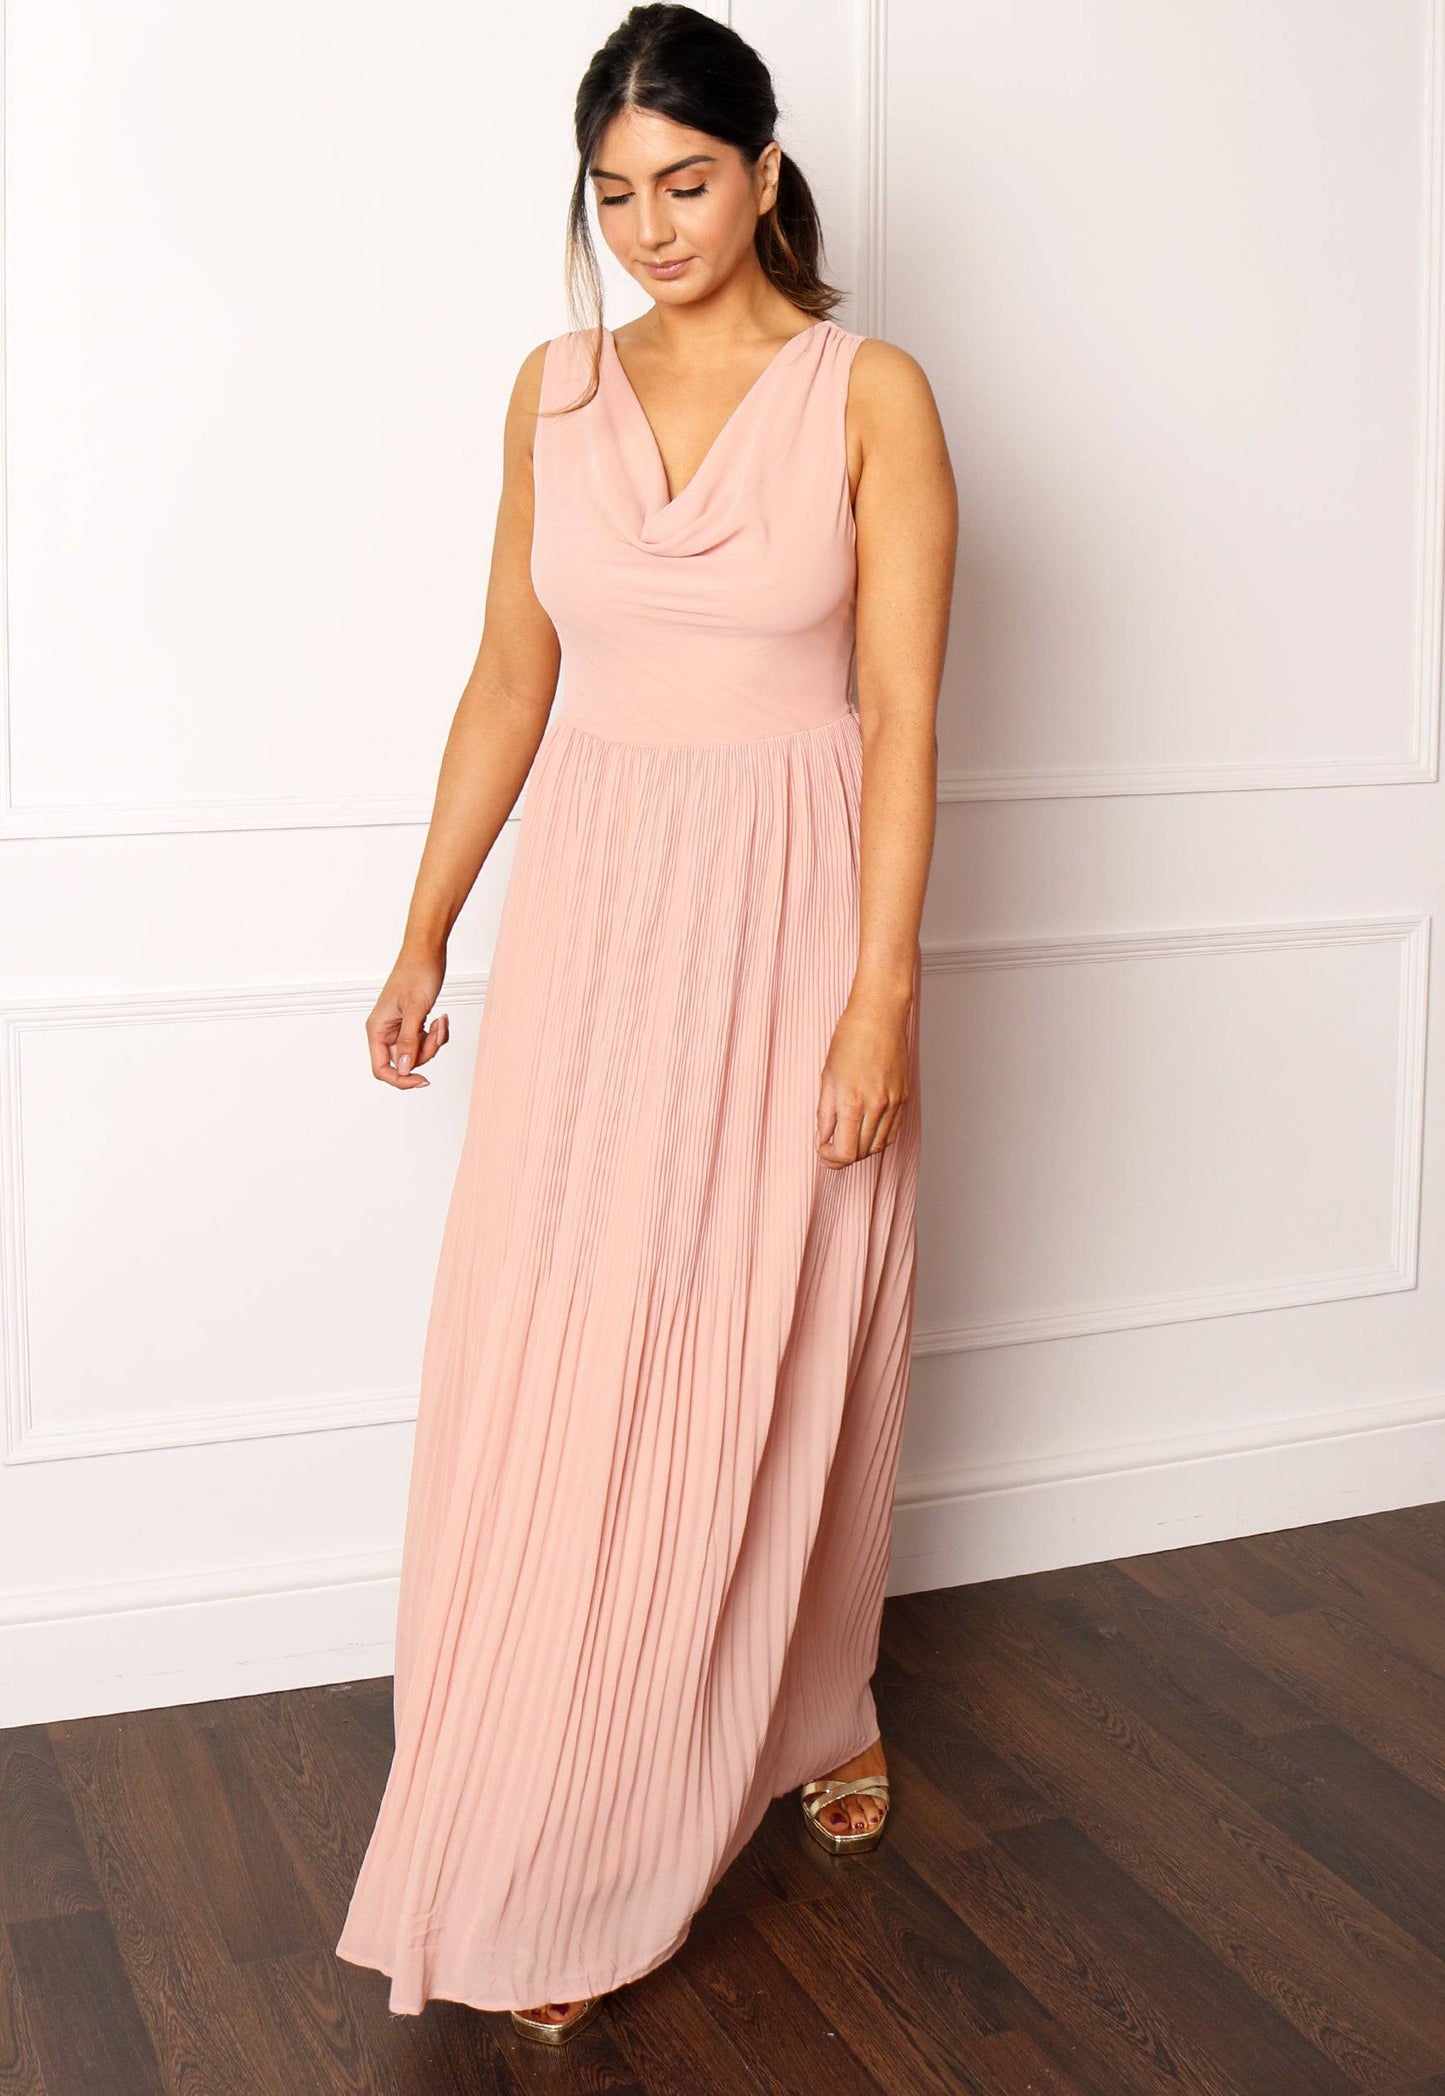 VILA Cowl Neck Pleated Maxi Dress in Dusky Pink - One Nation Clothing